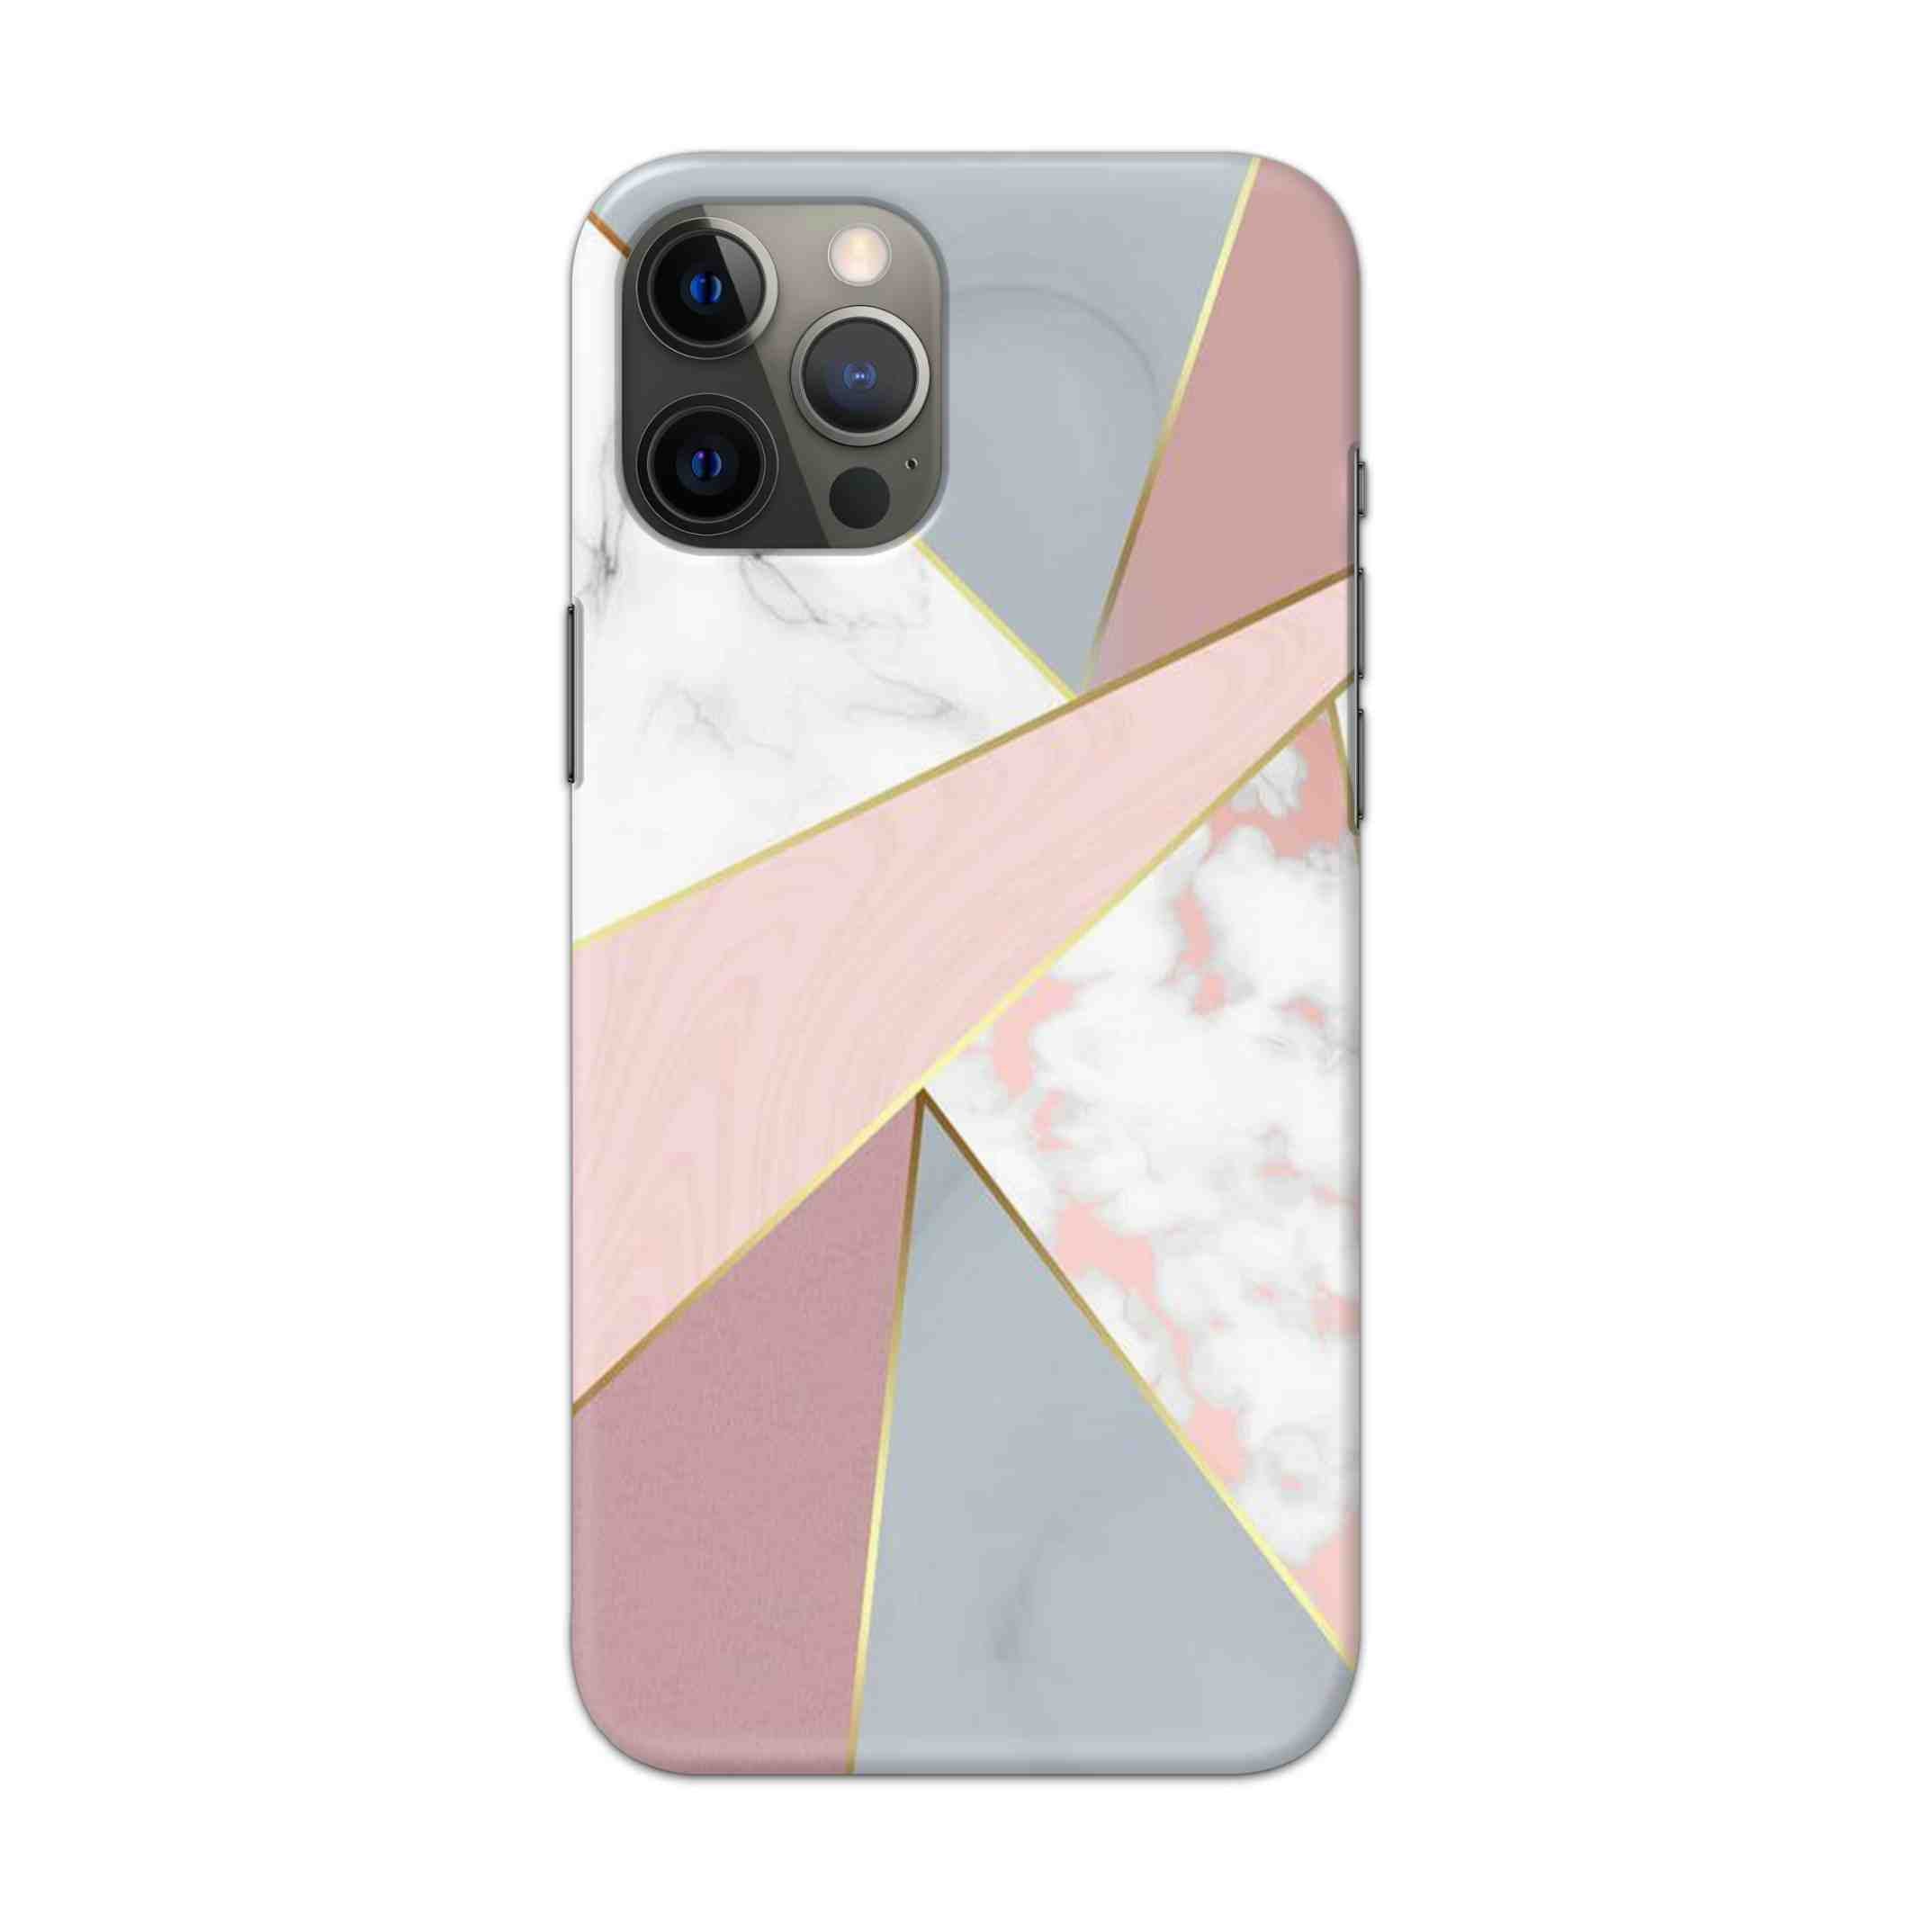 Buy Marble Shads Hard Back Mobile Phone Case Cover For Apple iPhone 12 pro max Online